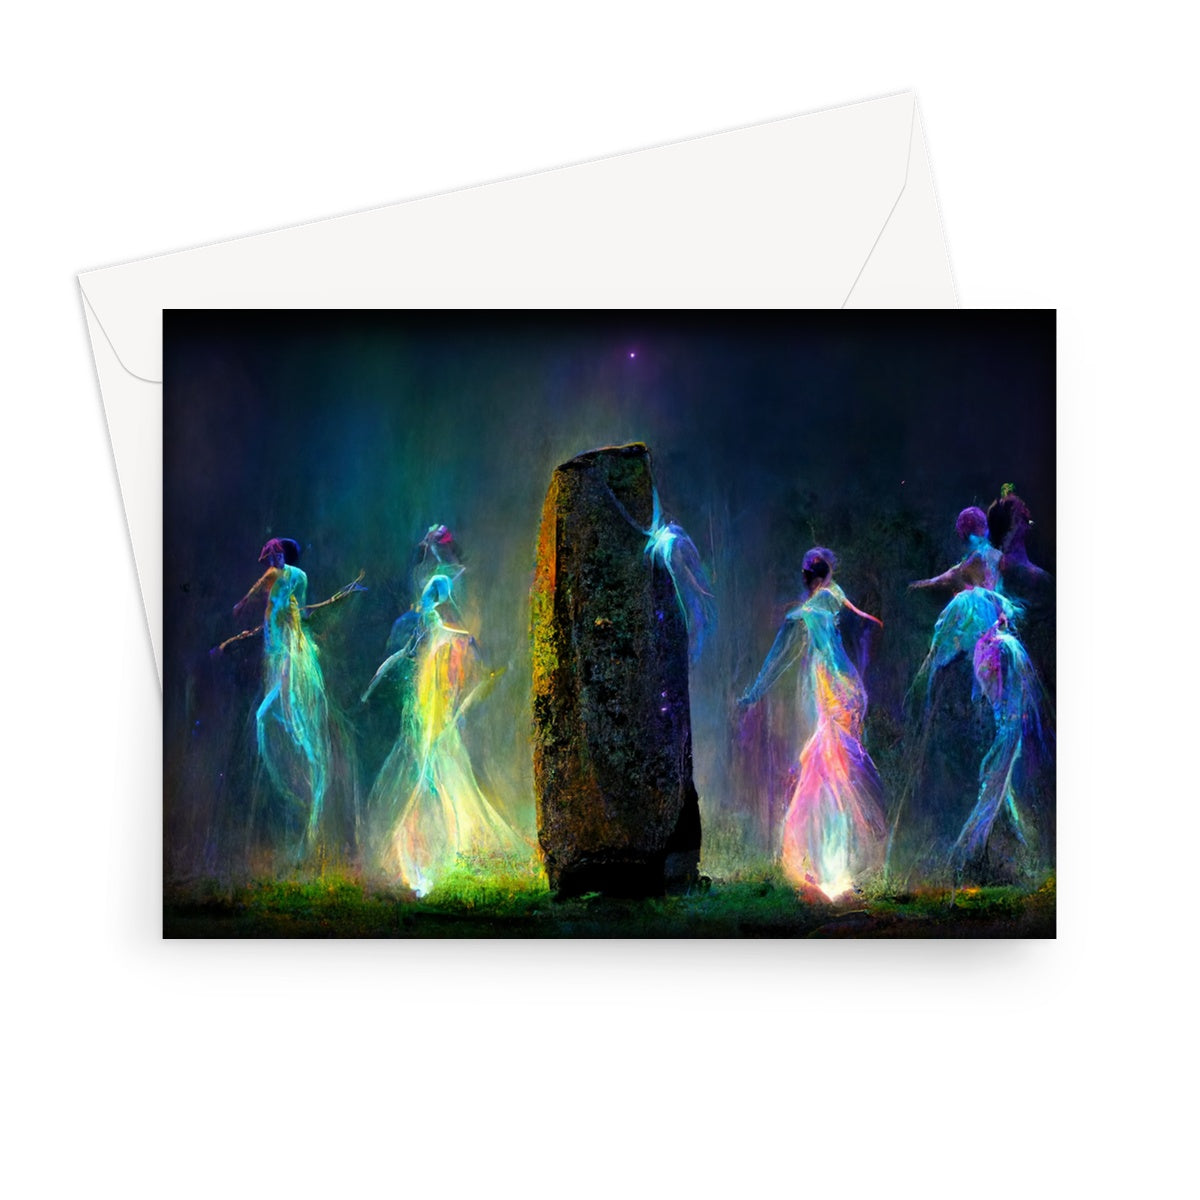 Standing Stones Fairies 9 Greeting Card